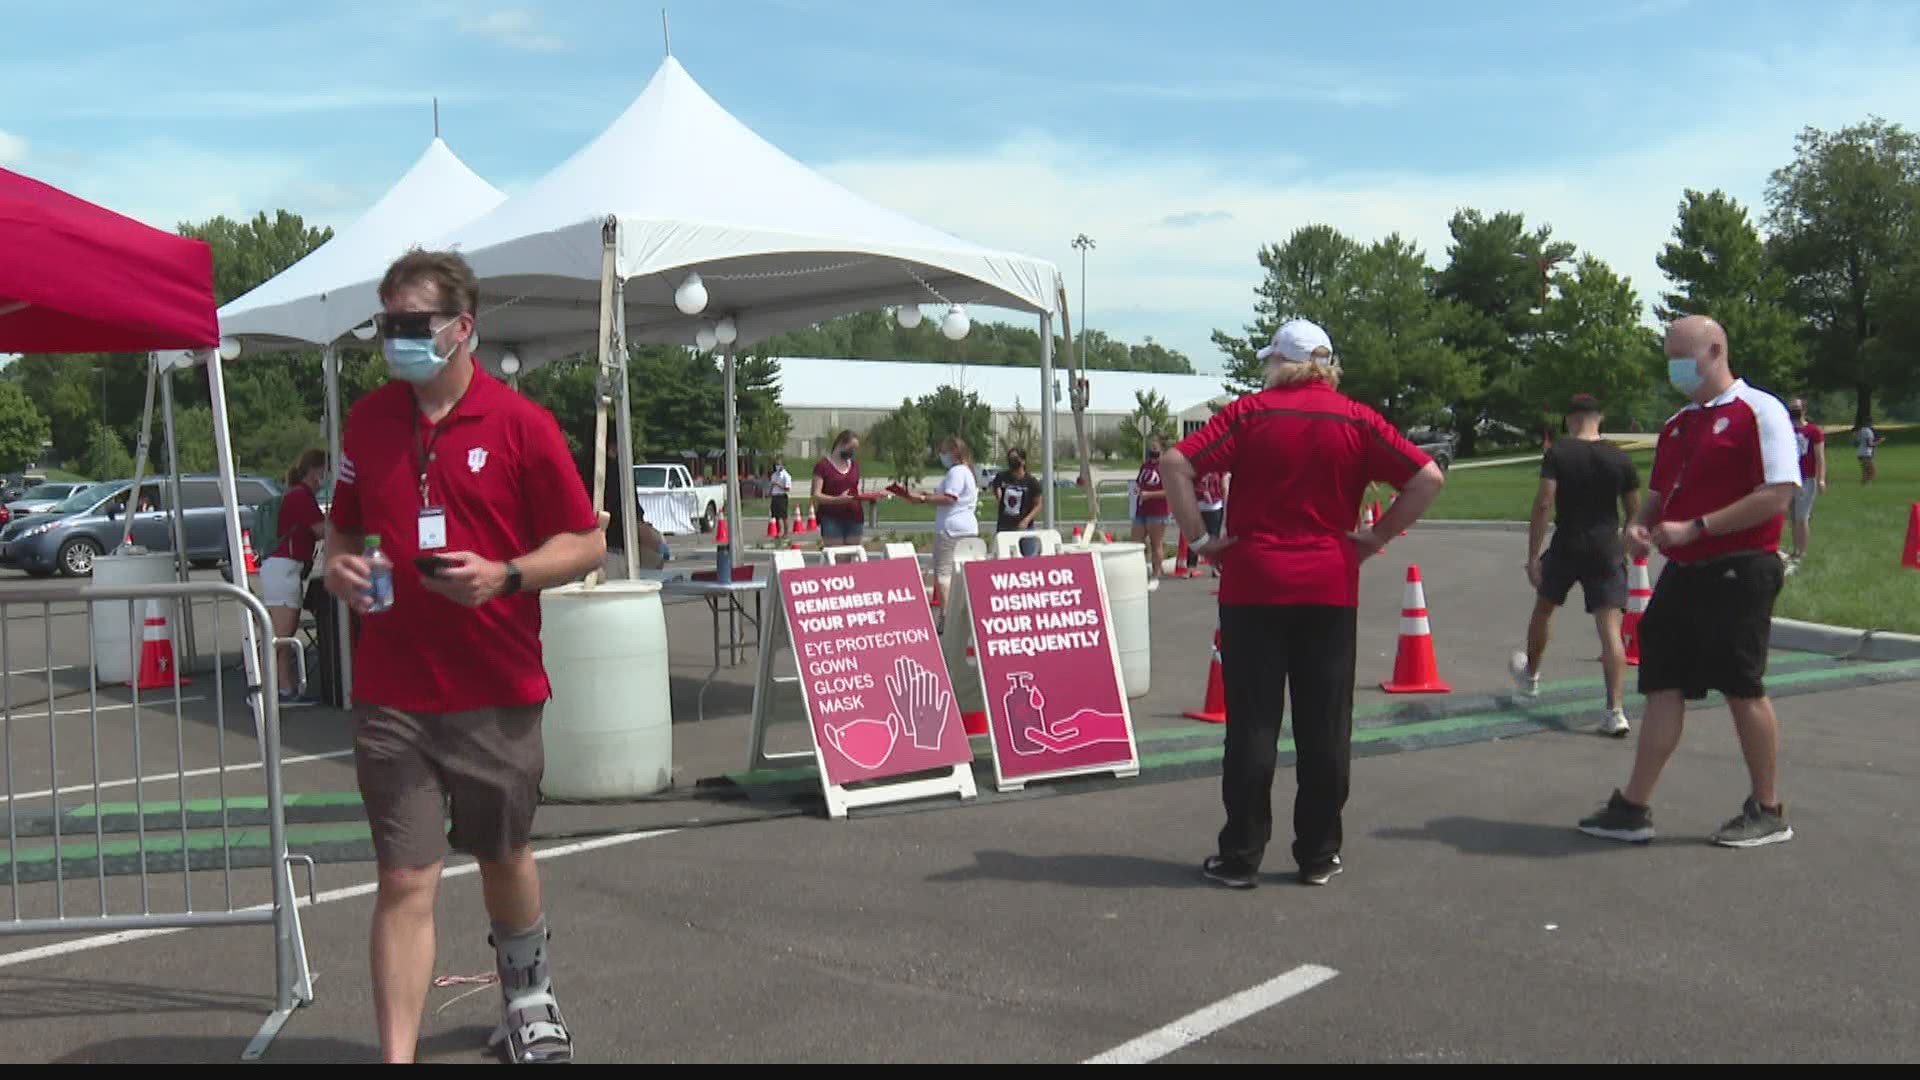 Sunday marked the first day of students moving back into campus housing at Indiana University but before they could move in, they had to take a COVID-19 test.